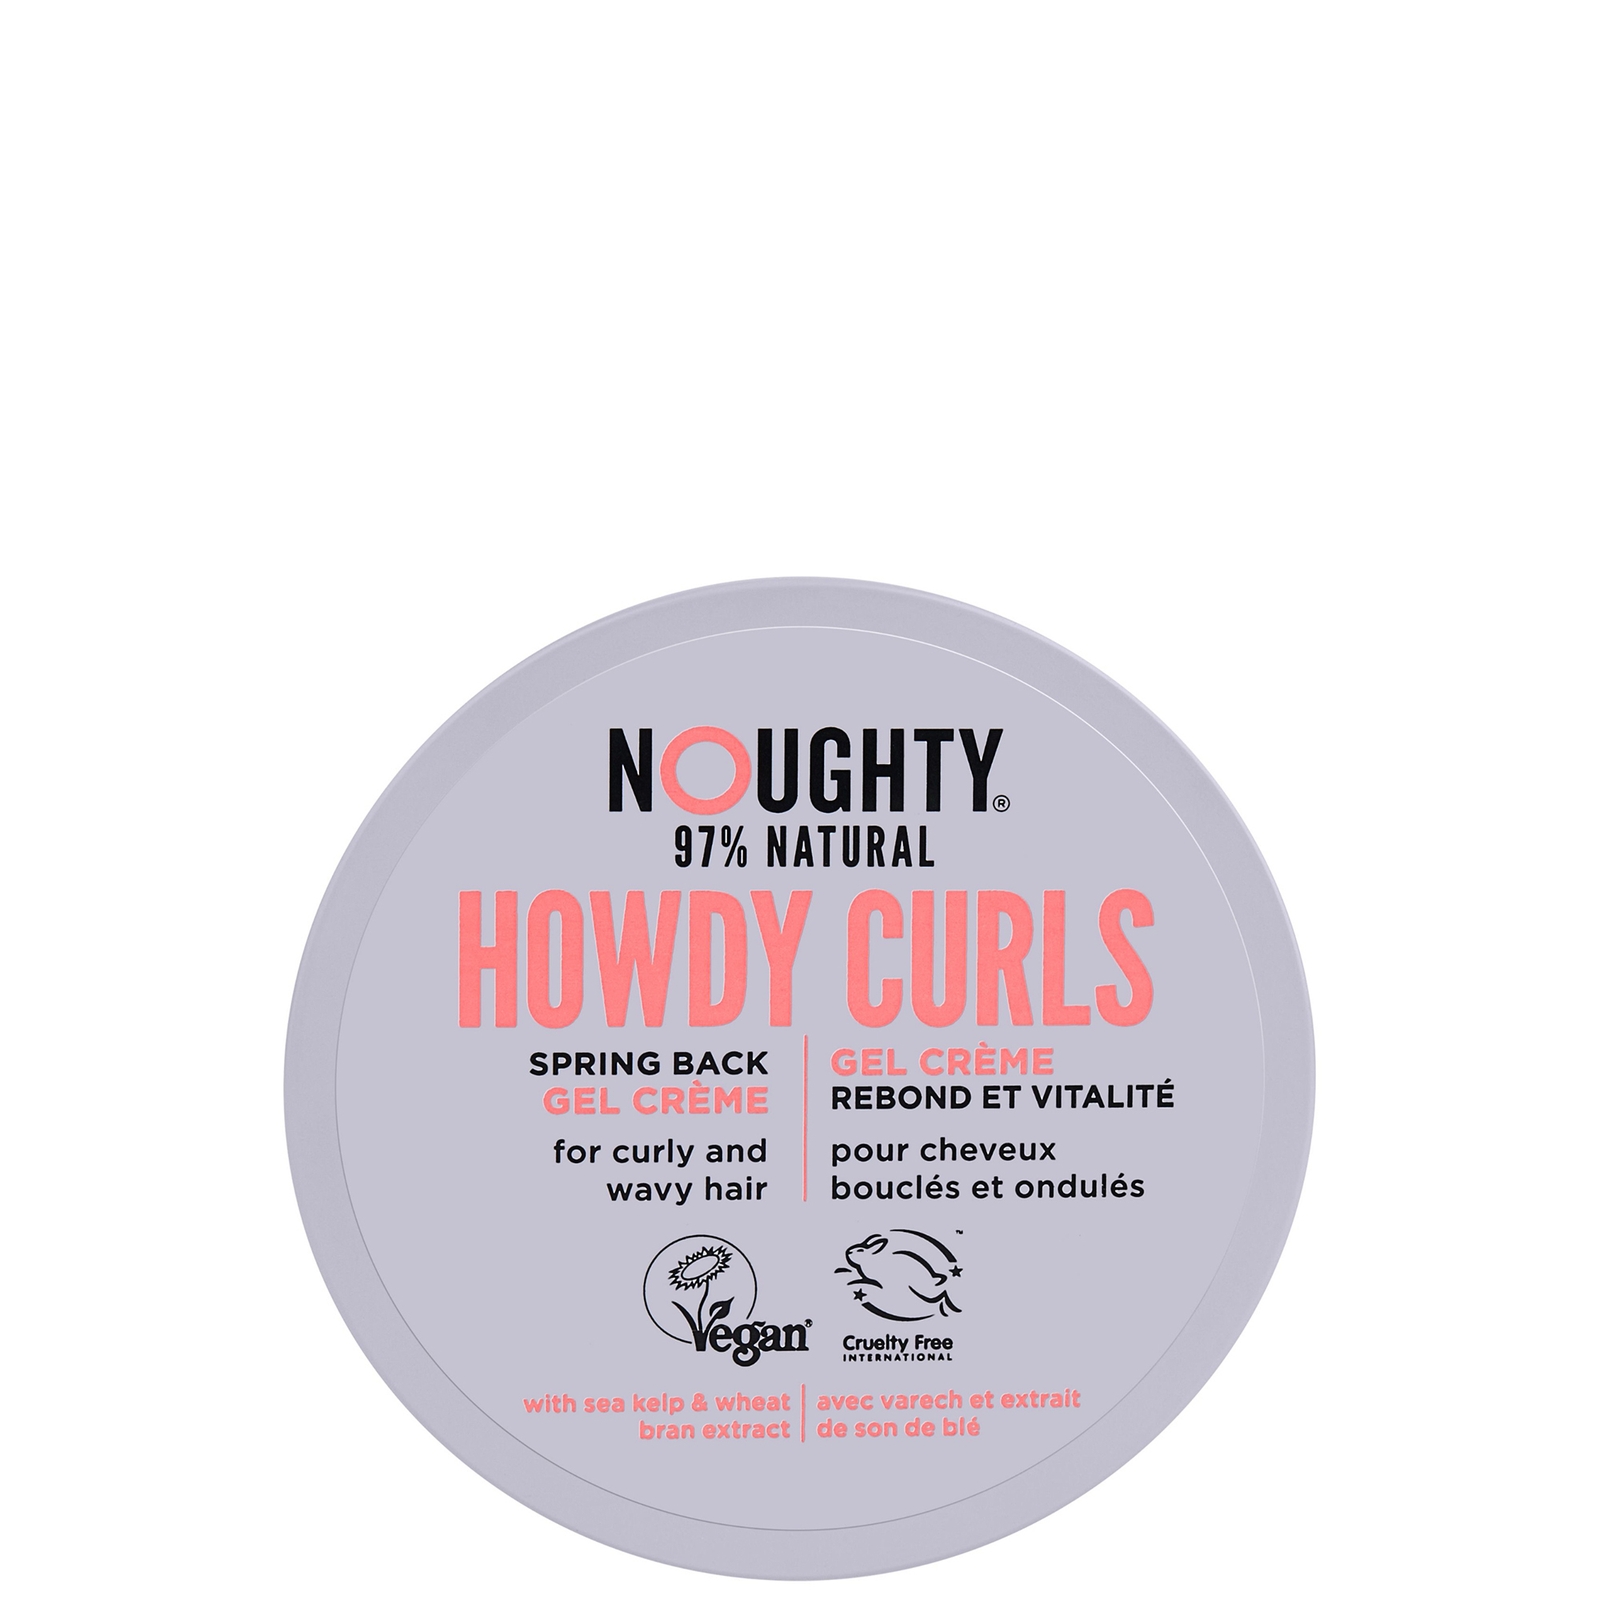 Noughty Howdy Curls Spring Back Gel Creme 200ml